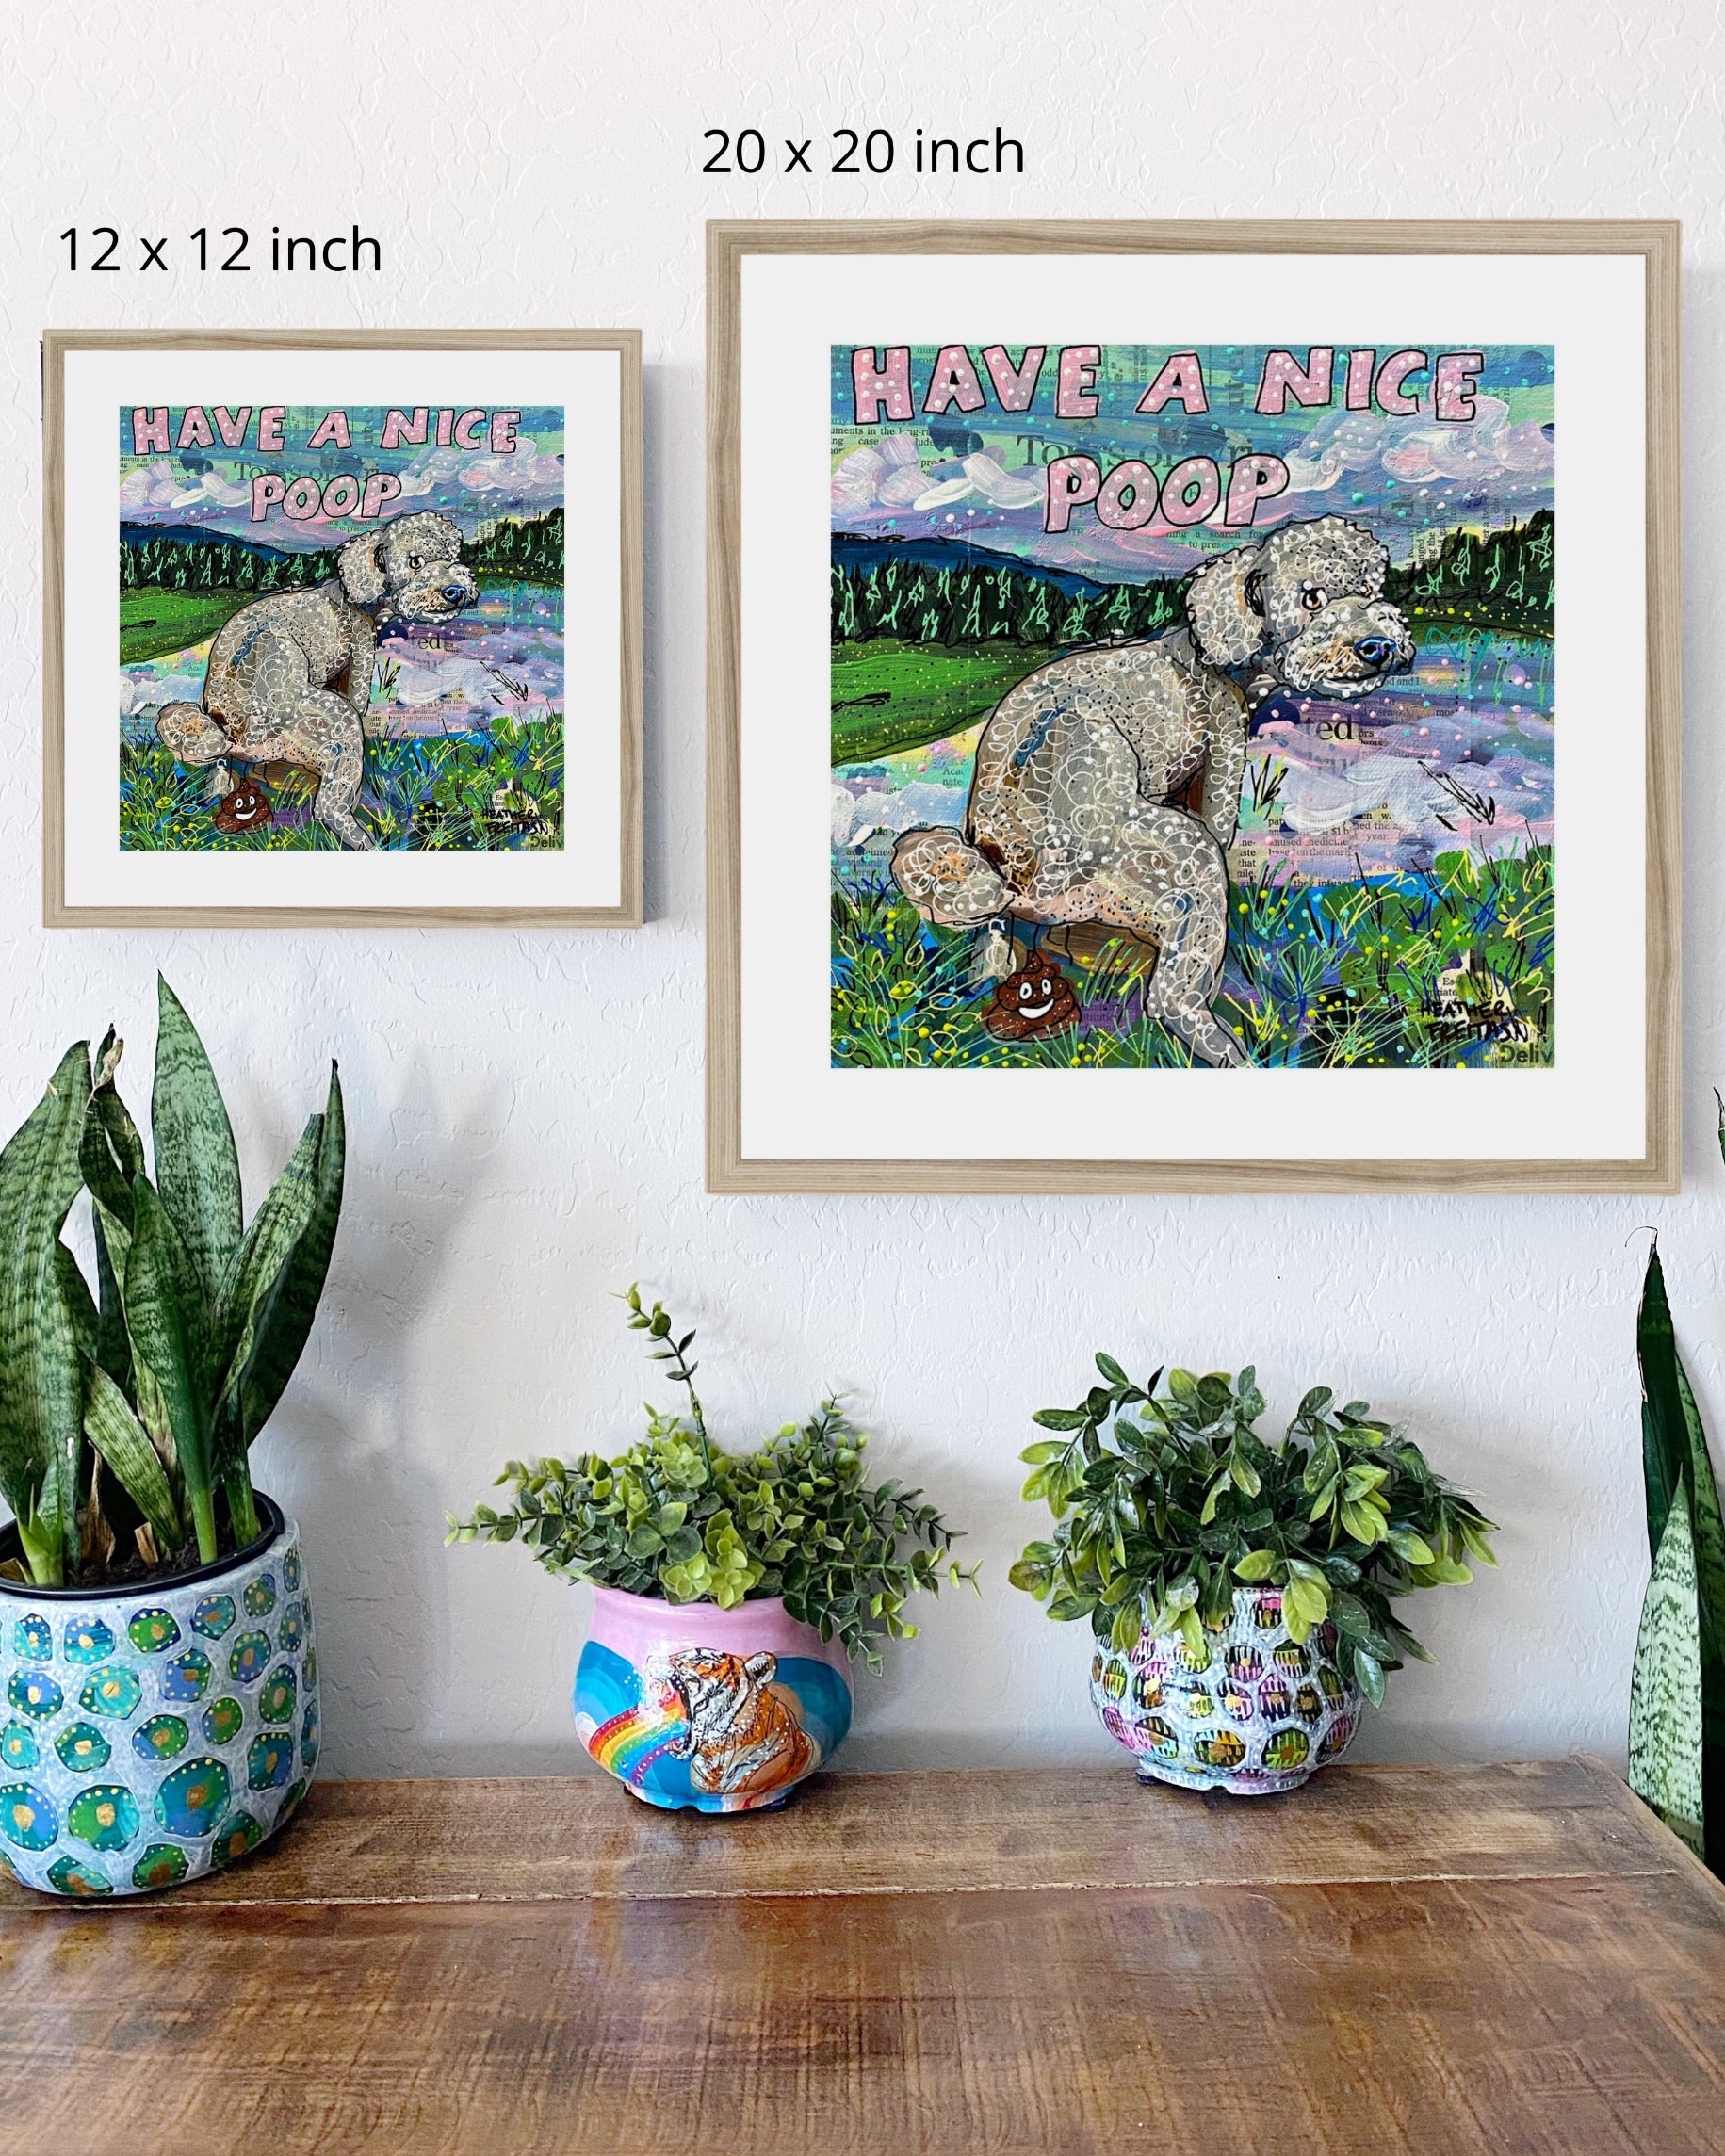 Have A Nice Poop Poodle Framed & Mounted Print - Heather Freitas - fine art home deccor